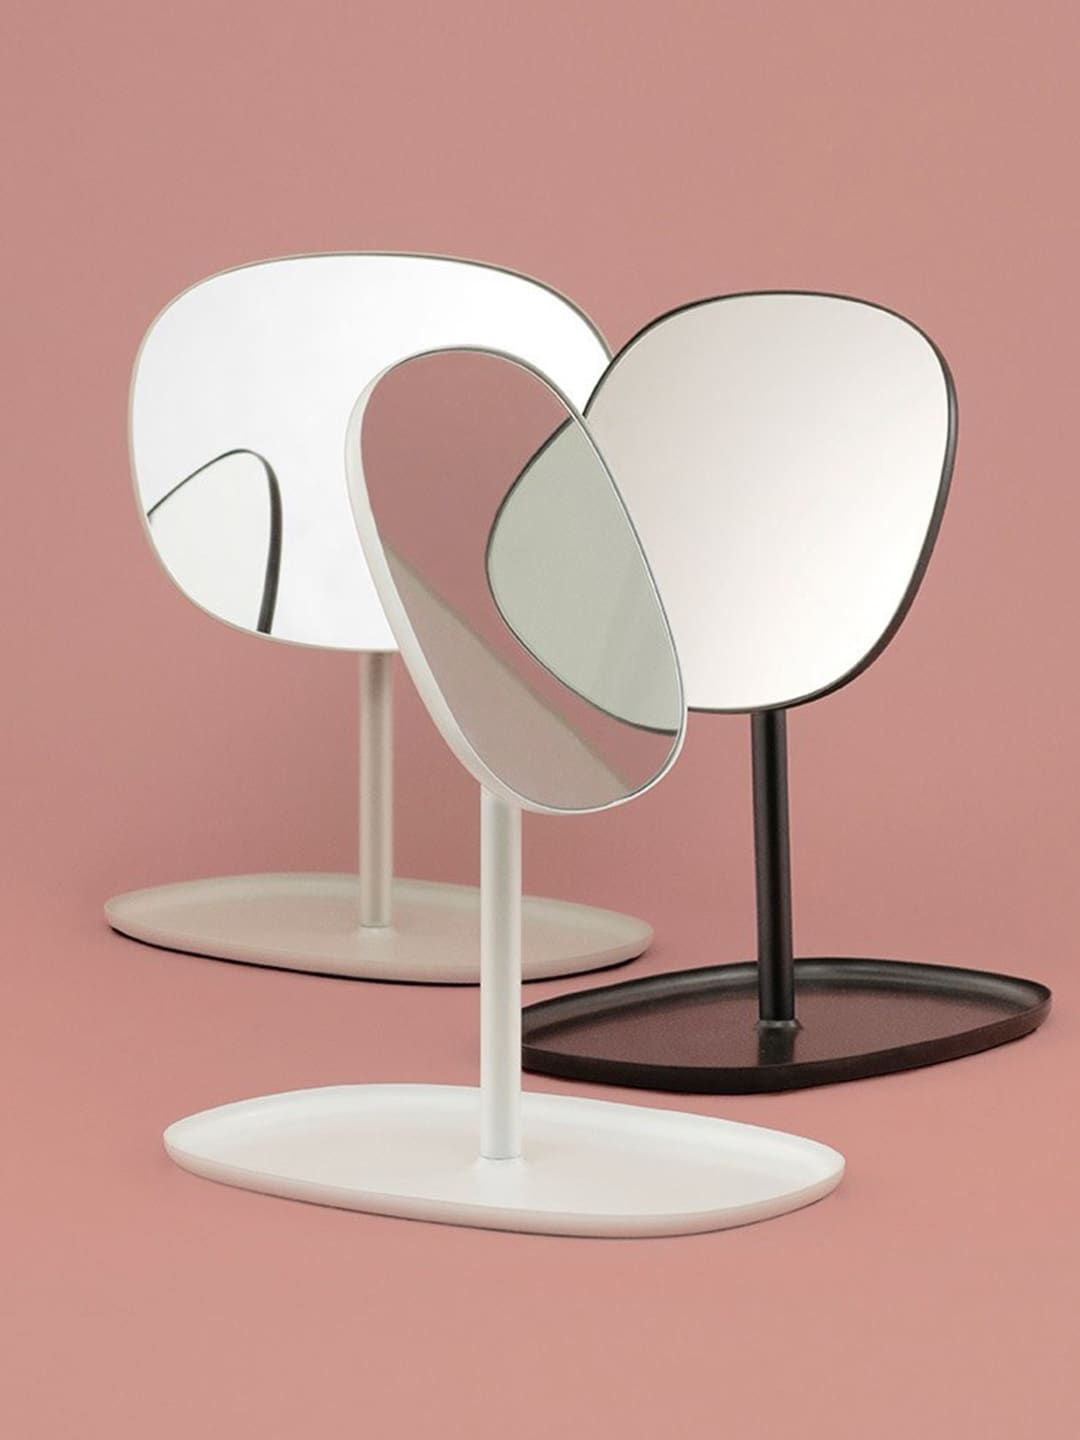 MARKET99 White Solid Light Up Table Top Mirror Price in India